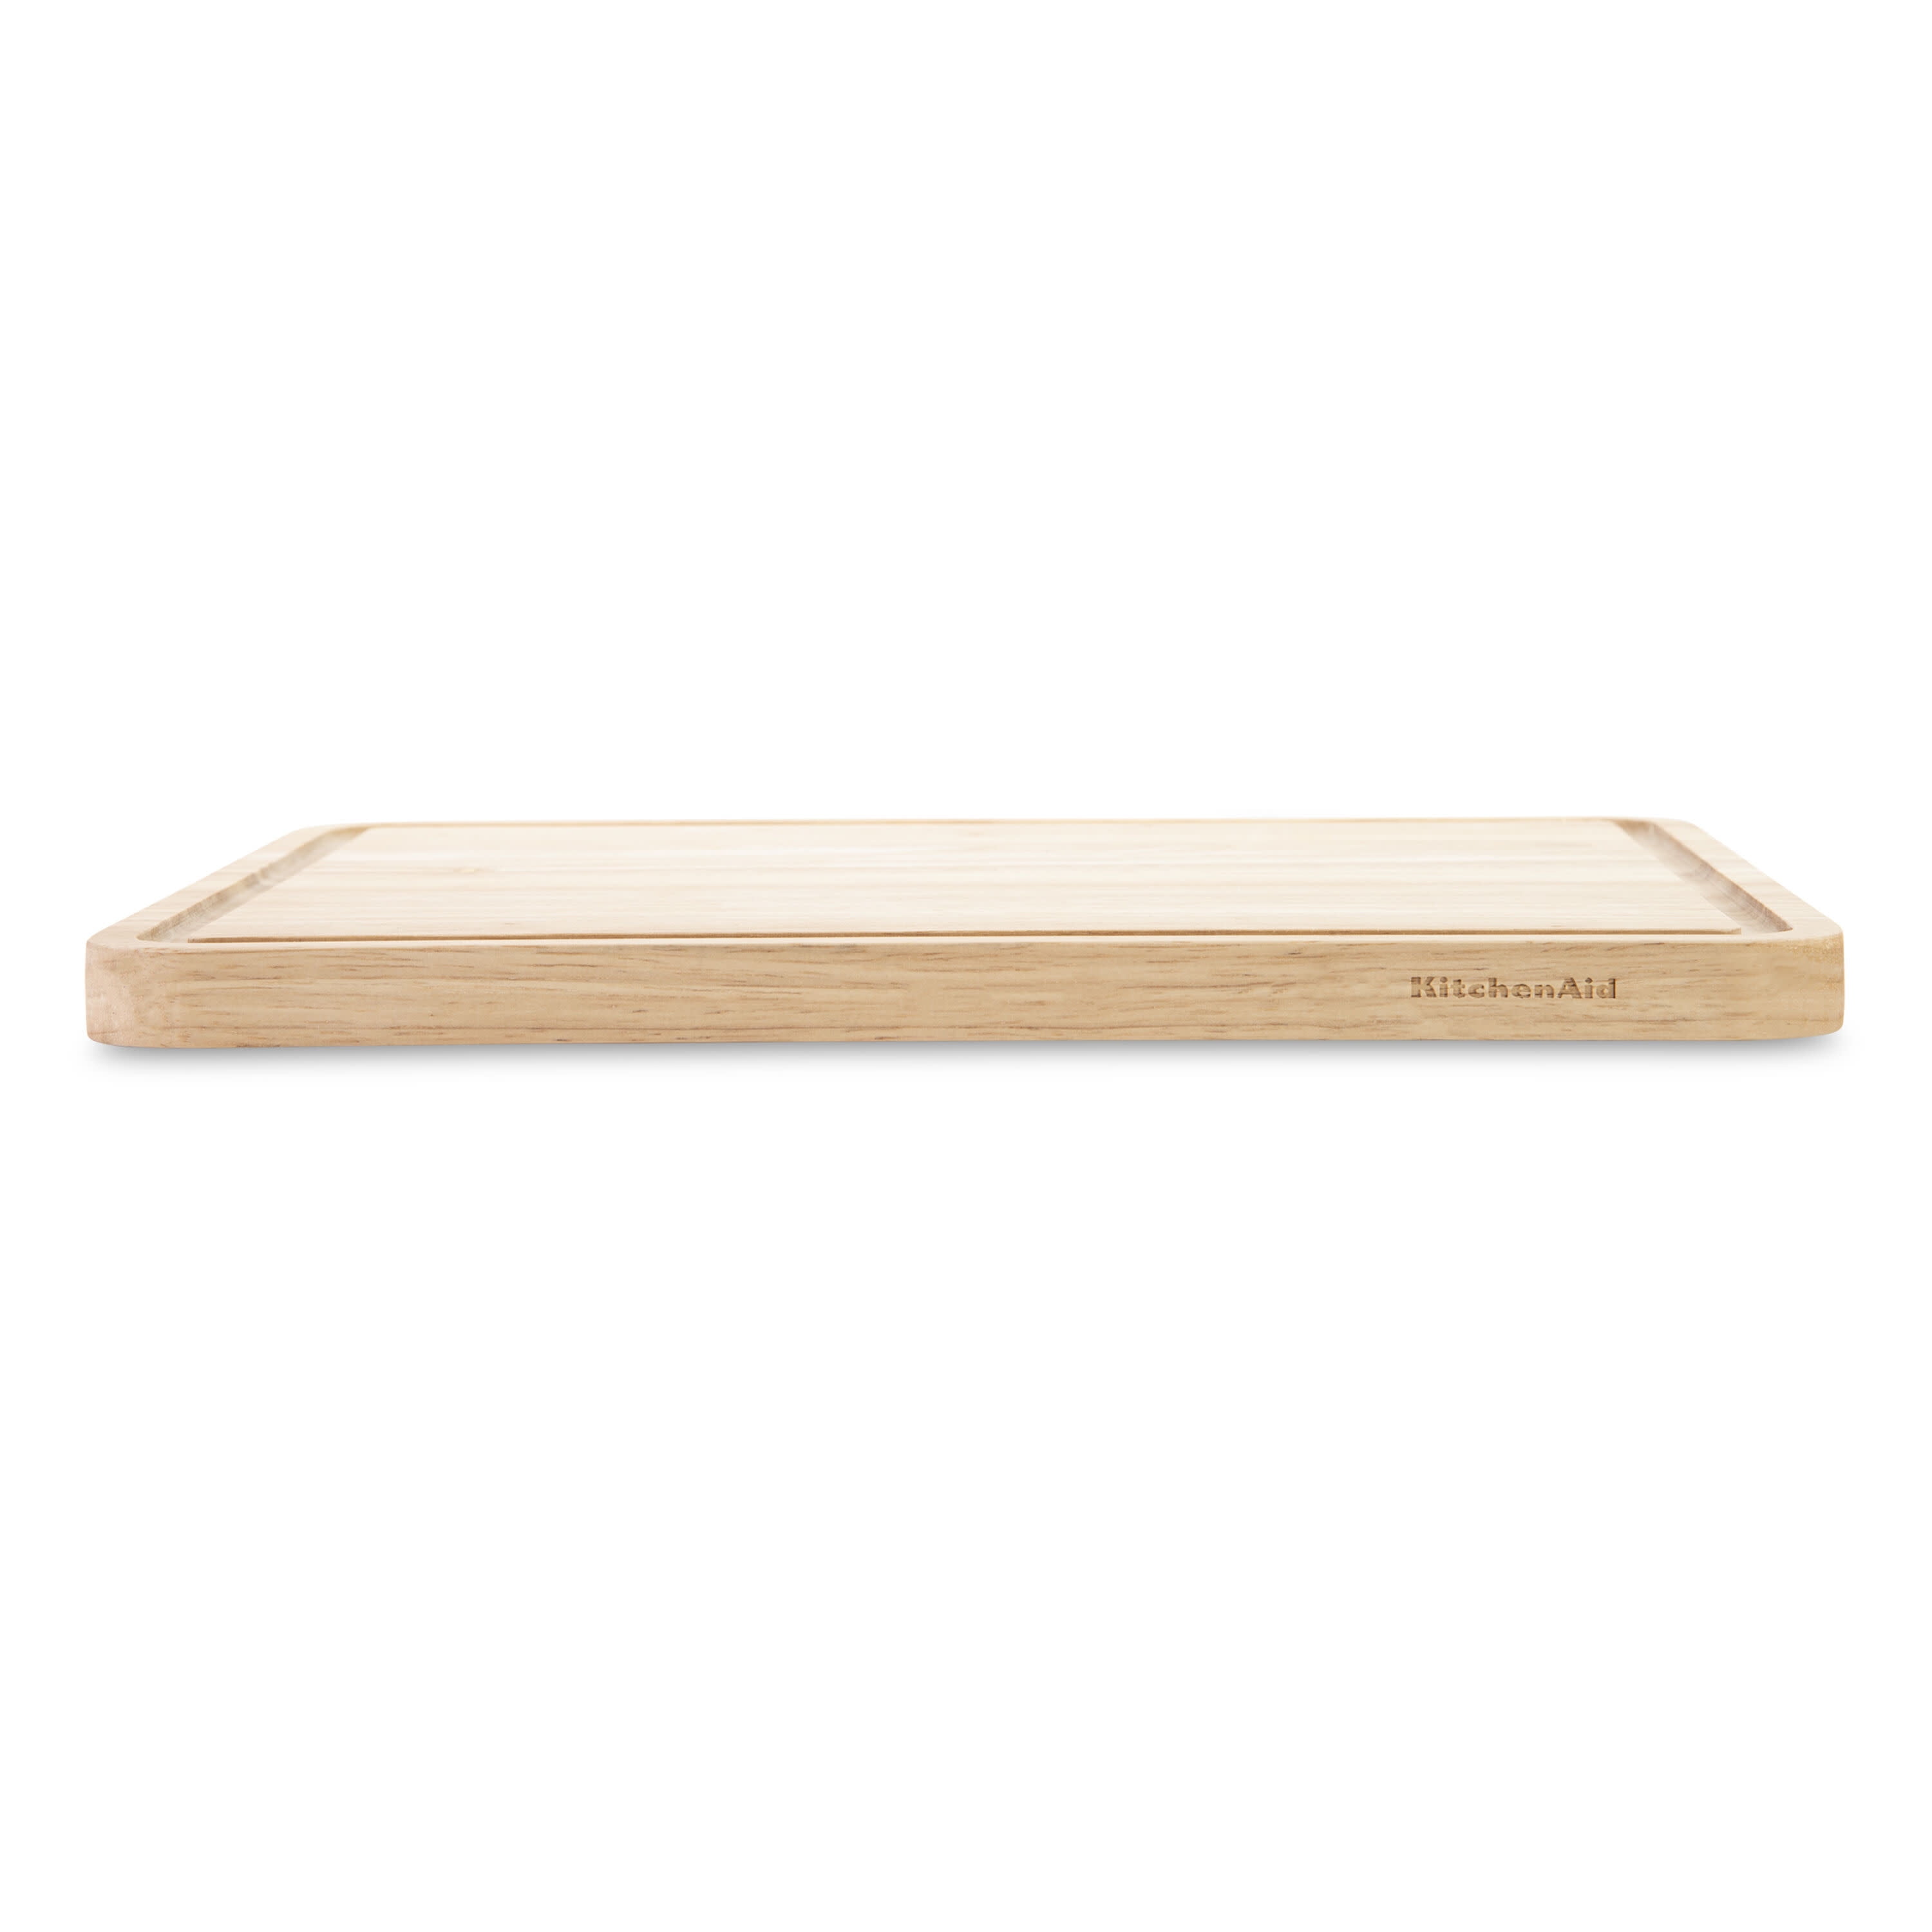 KitchenAid Gourmet Cutting Board with Non-Slip feet and Recessed Handles,  Thick Chopping Board with Edge-Grain Design, Charcuterie Board, 12x16-inch